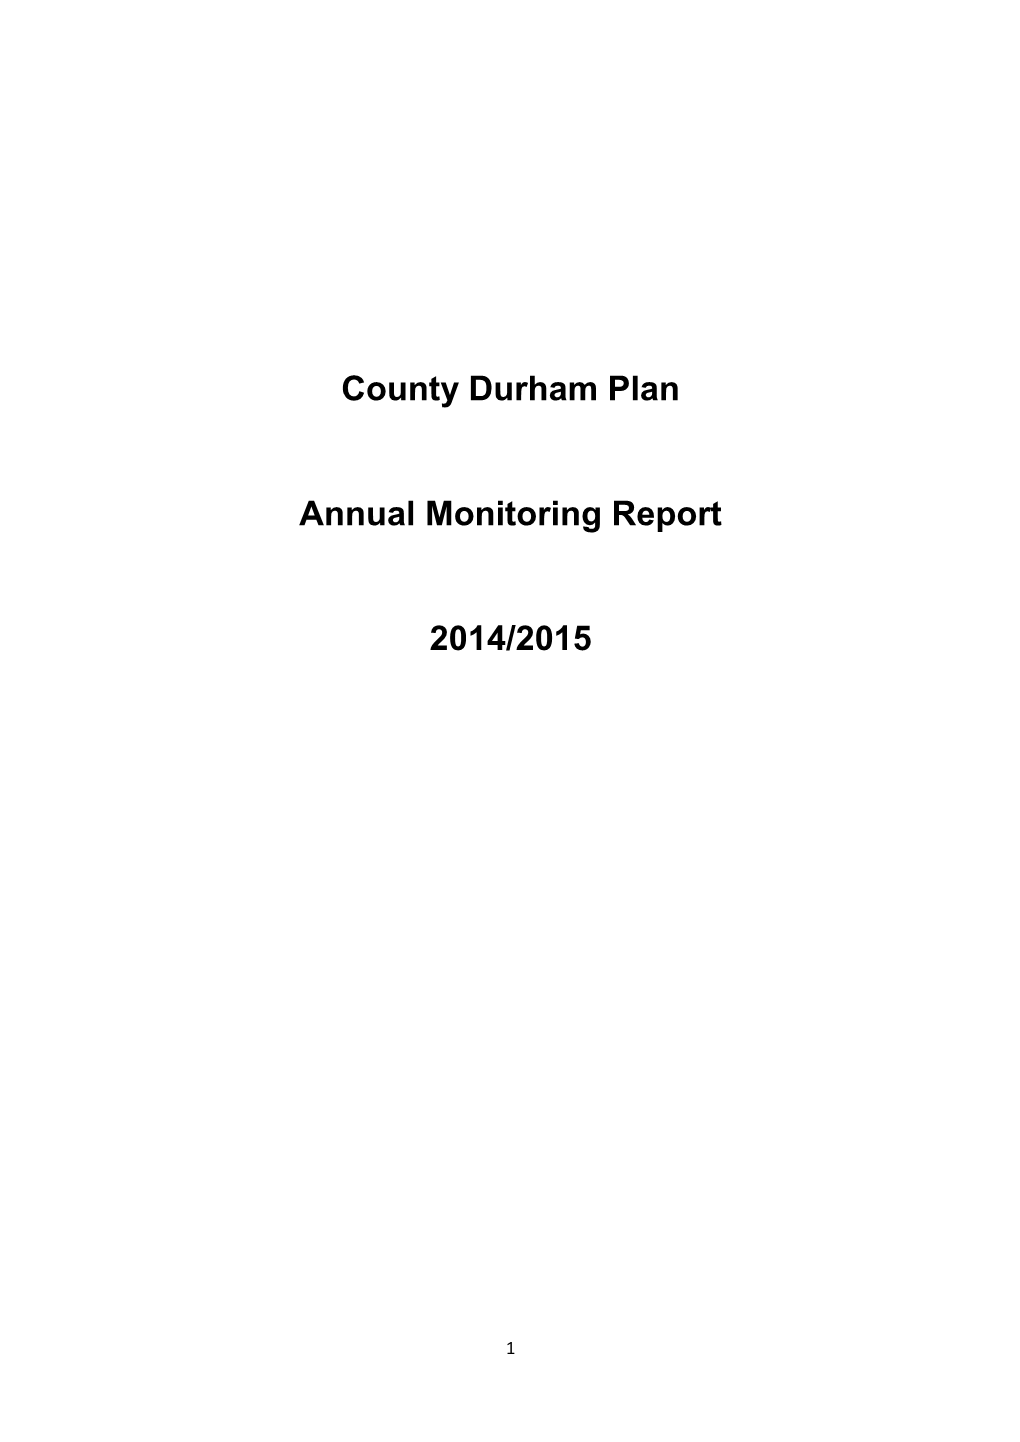 County Durham Plan Annual Monitoring Report 2014/2015